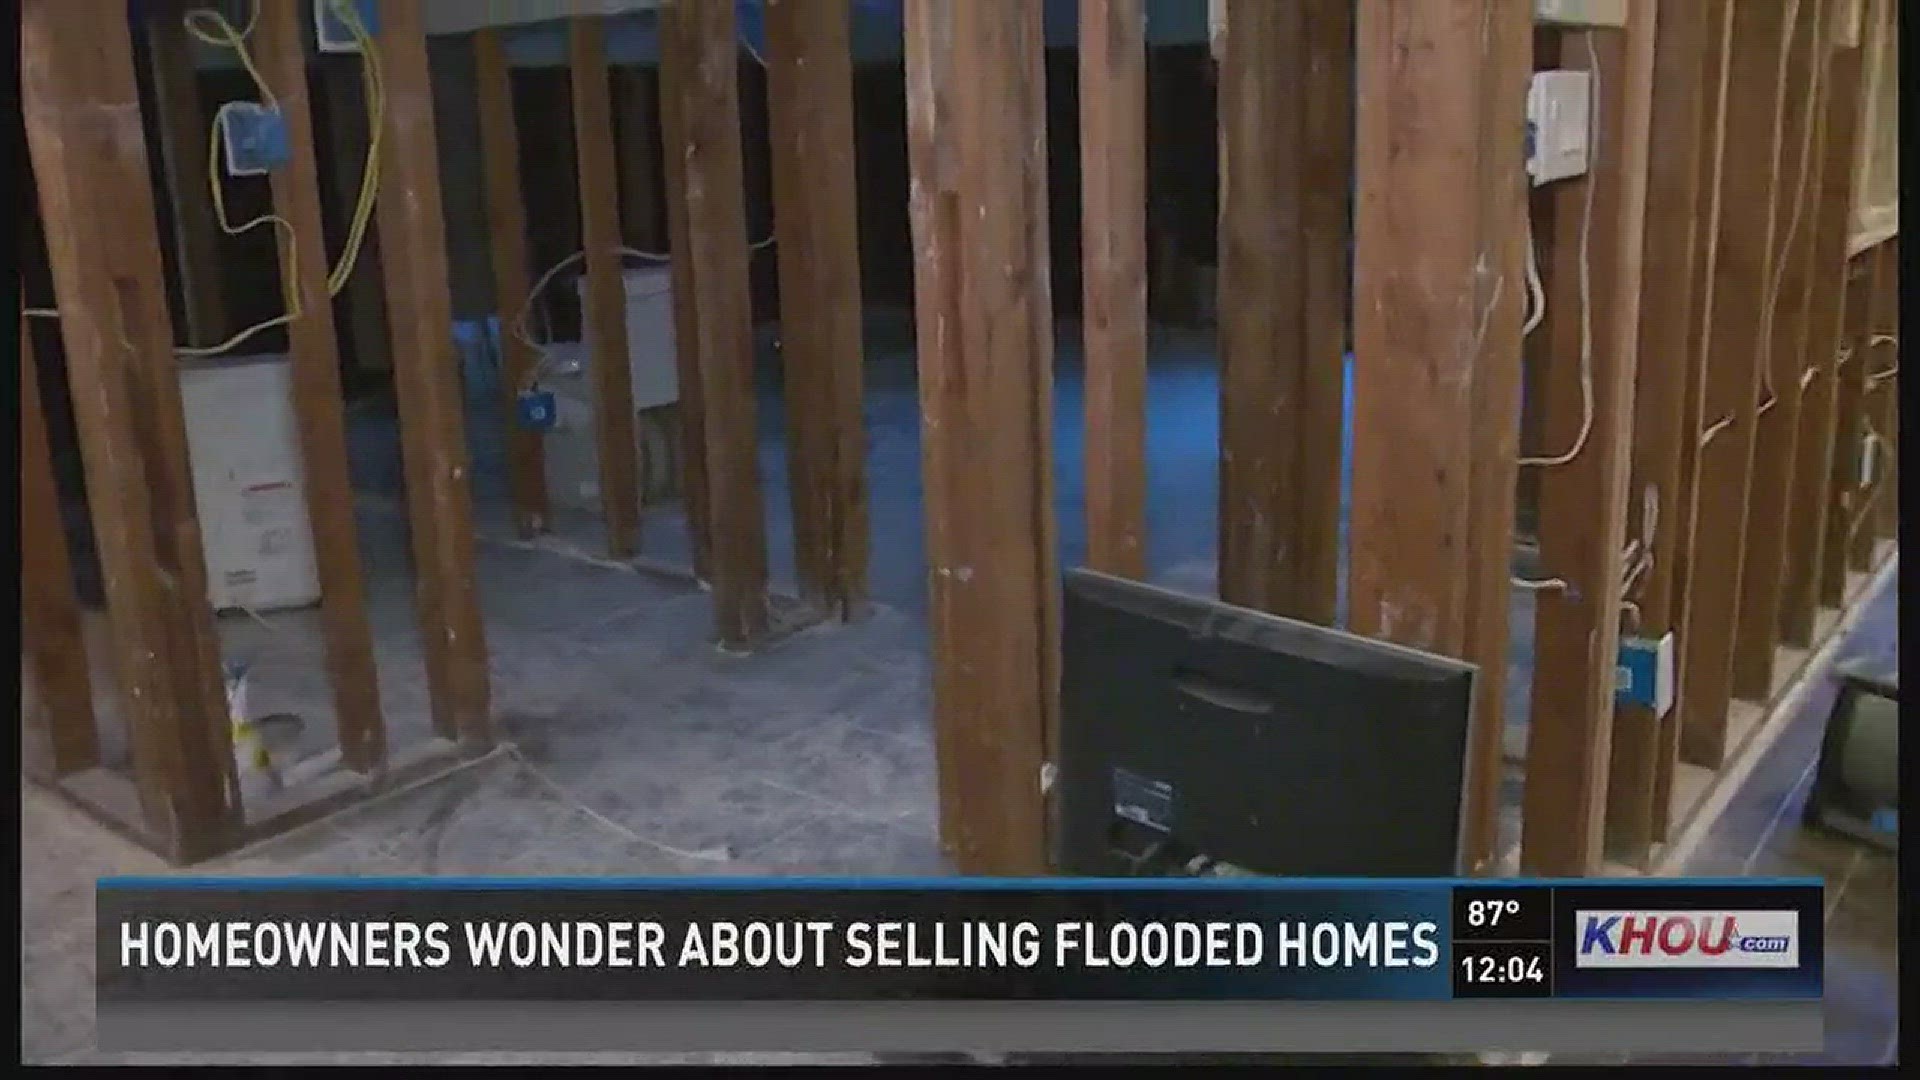 A local real estate agent has tips for homeowners who are wondering about selling flooded homes.